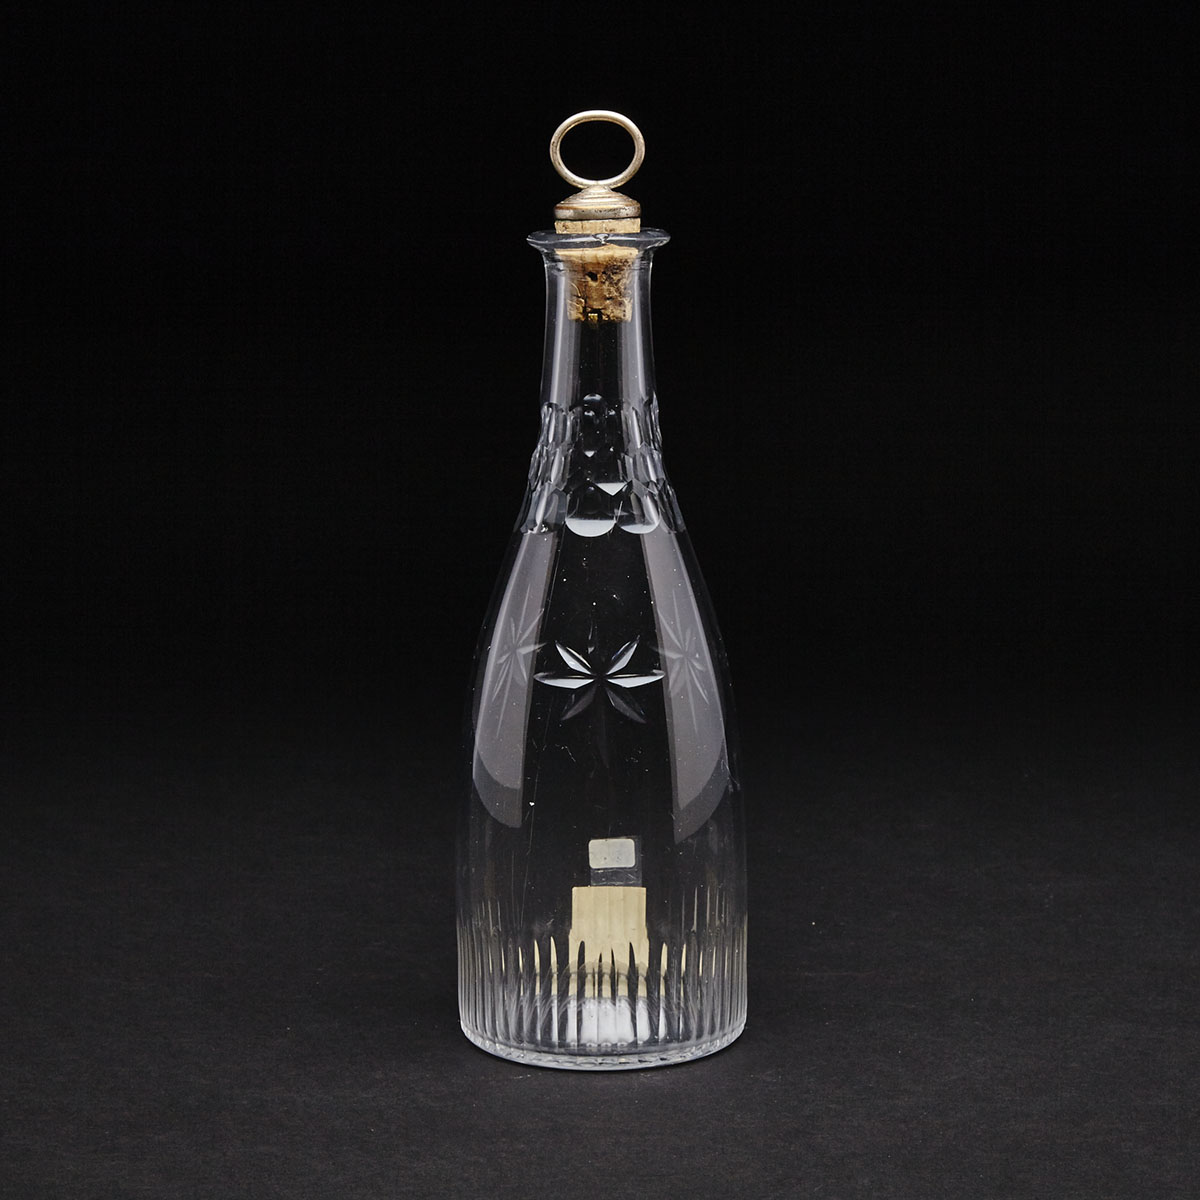 English Cut Glass Decanter, late 18th century